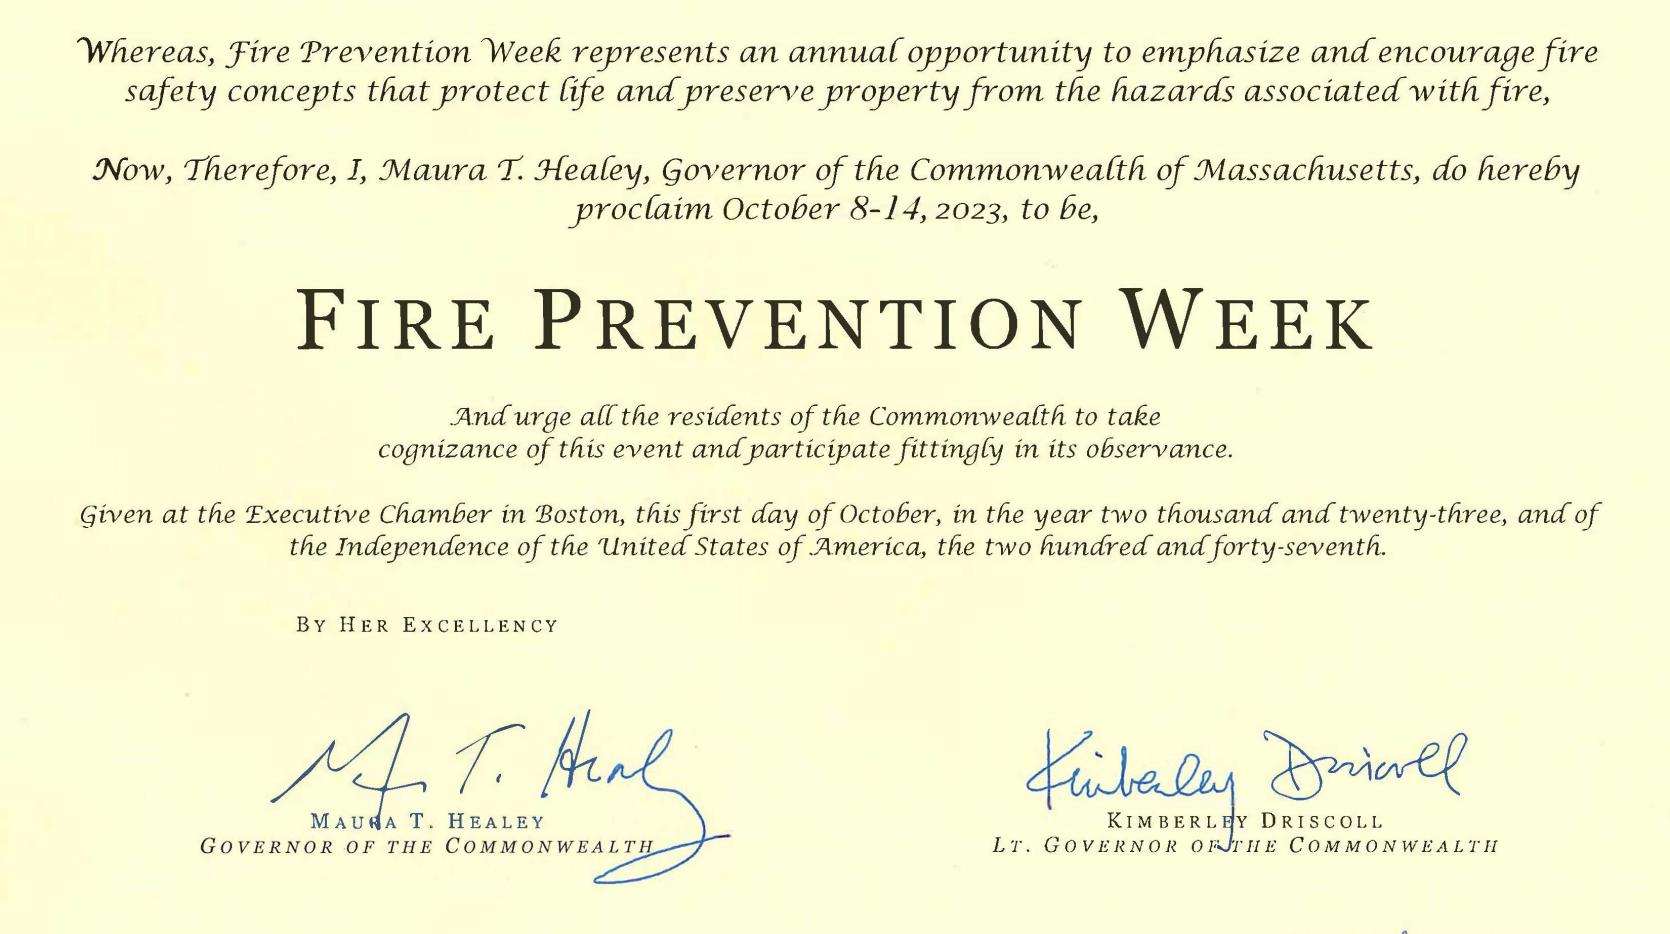 Picture of a proclamation by Gov. Maura Healey declaring Fire Prevention Week in Massachusetts